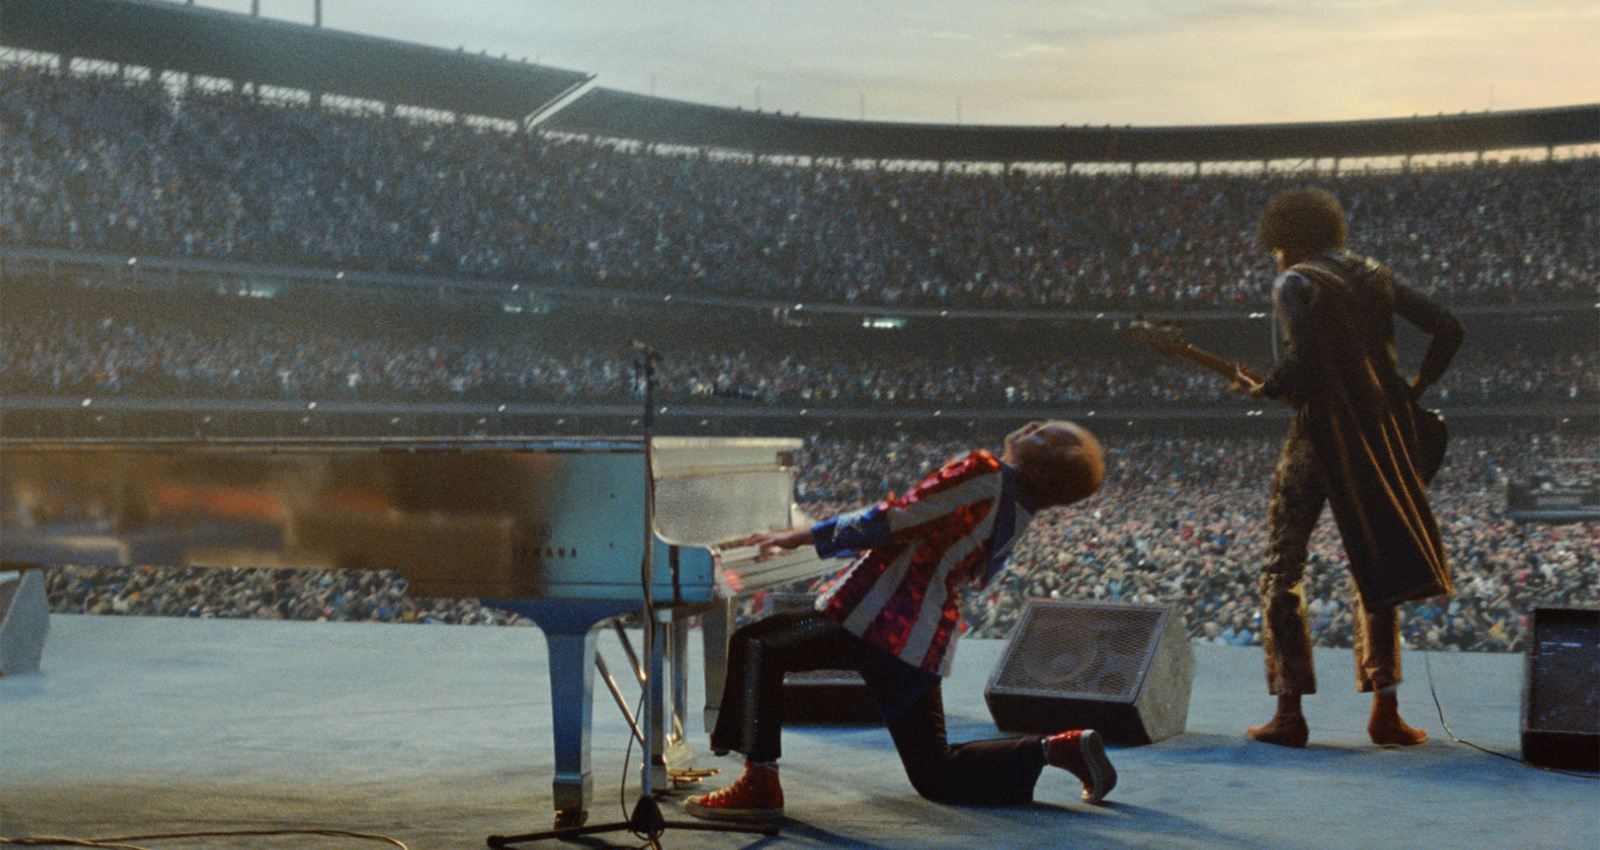 The Boy and the Piano